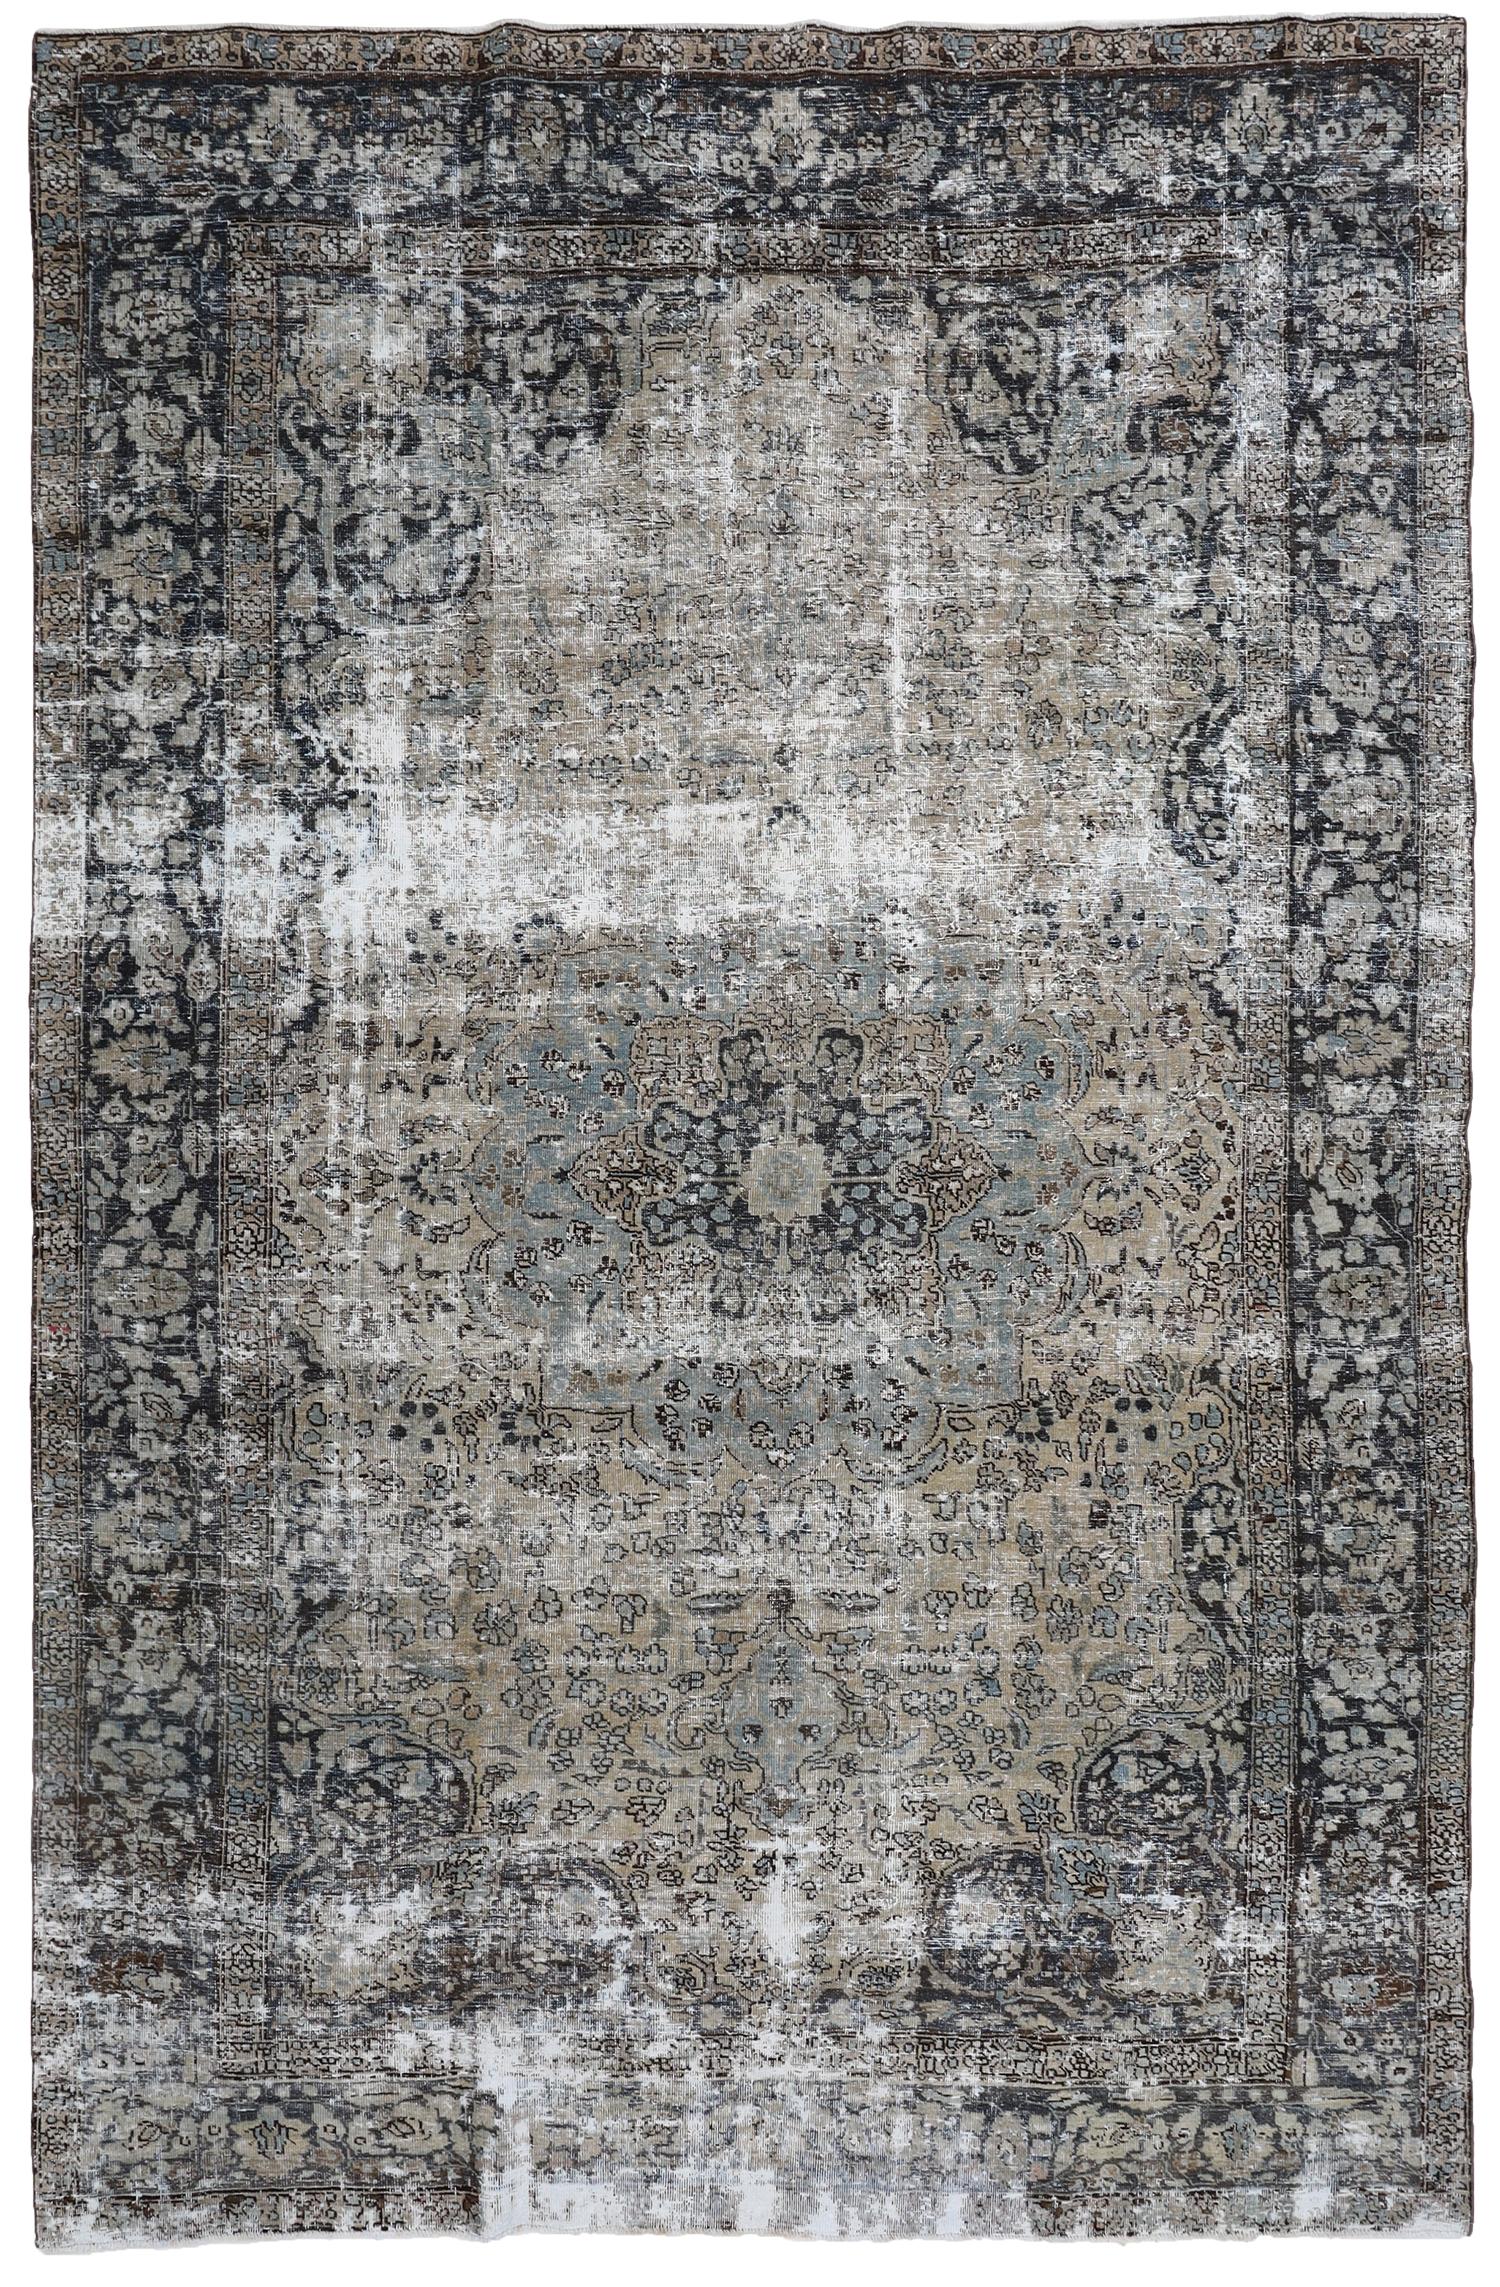 Age: Circa 1930

Colors: taupe, pale blue, deep blue, brown

Pile: low

Wear Notes: 8

Material: Wool on Cotton. 

Moody vintage Persian Mahal with an overall cool tone and mysterious deep colors. The blackened blue is a gorgeous contrast